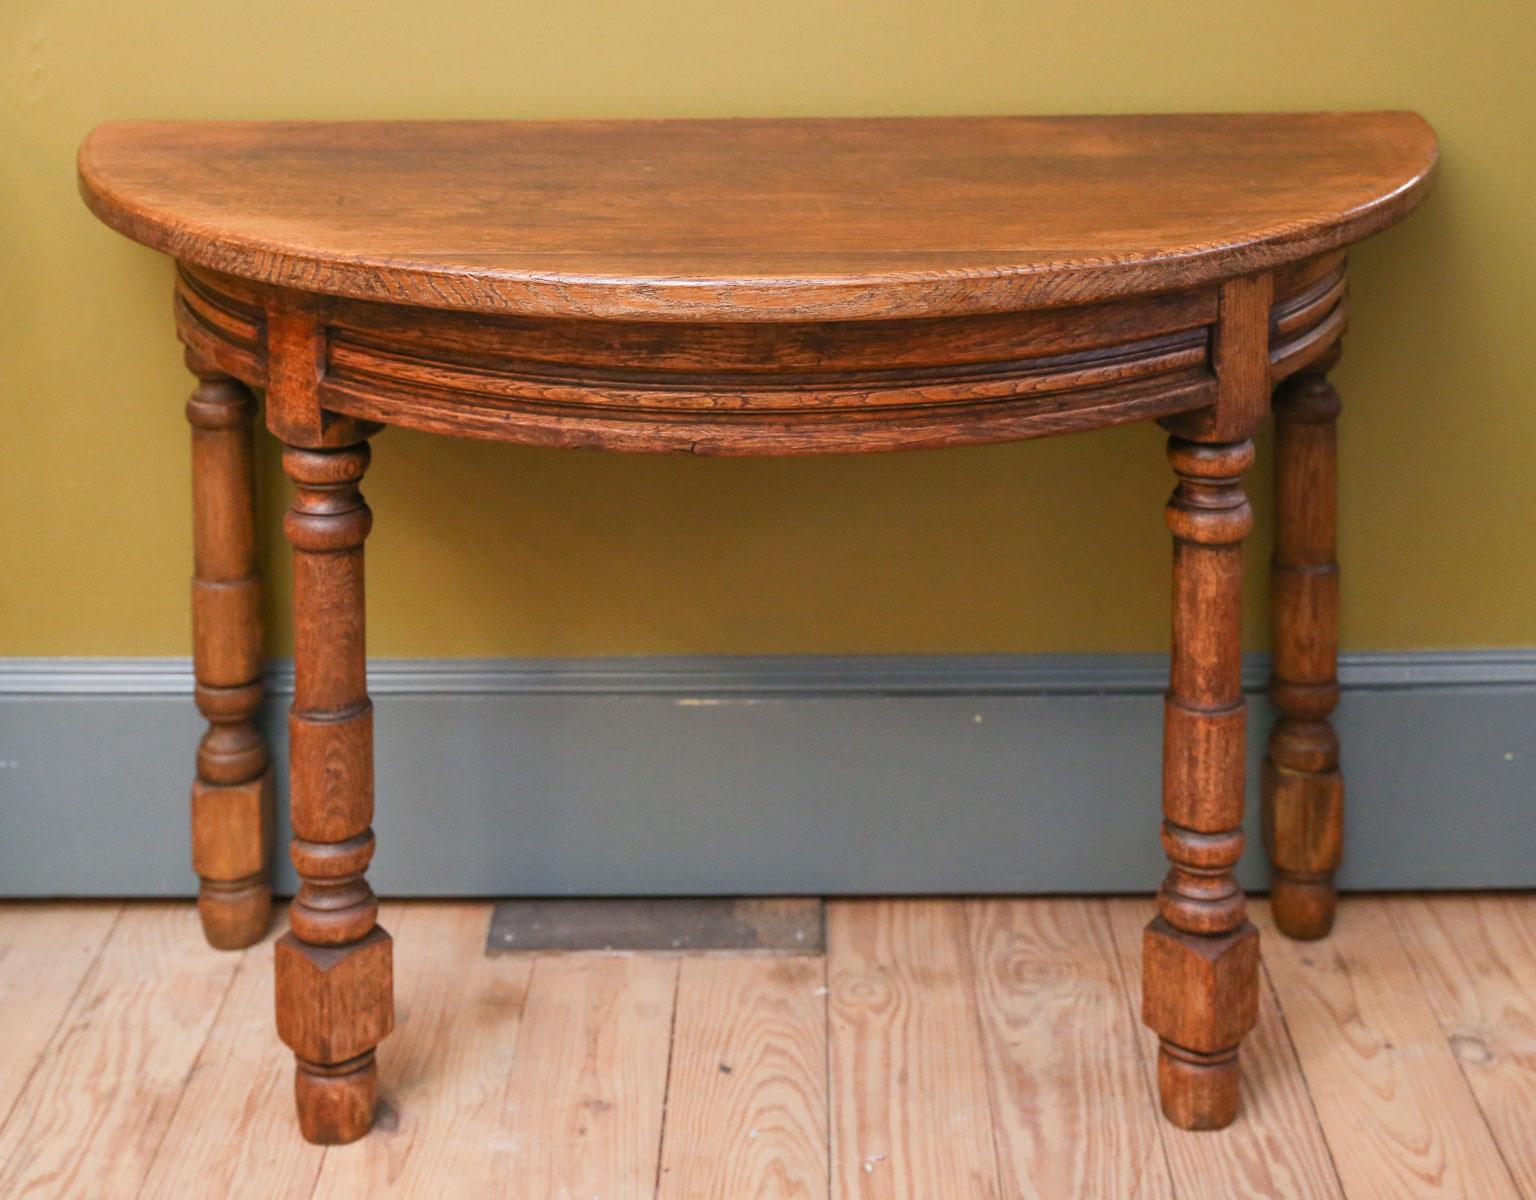 Country Pair of Heavy Oak Demilune Tables with Turned Legs